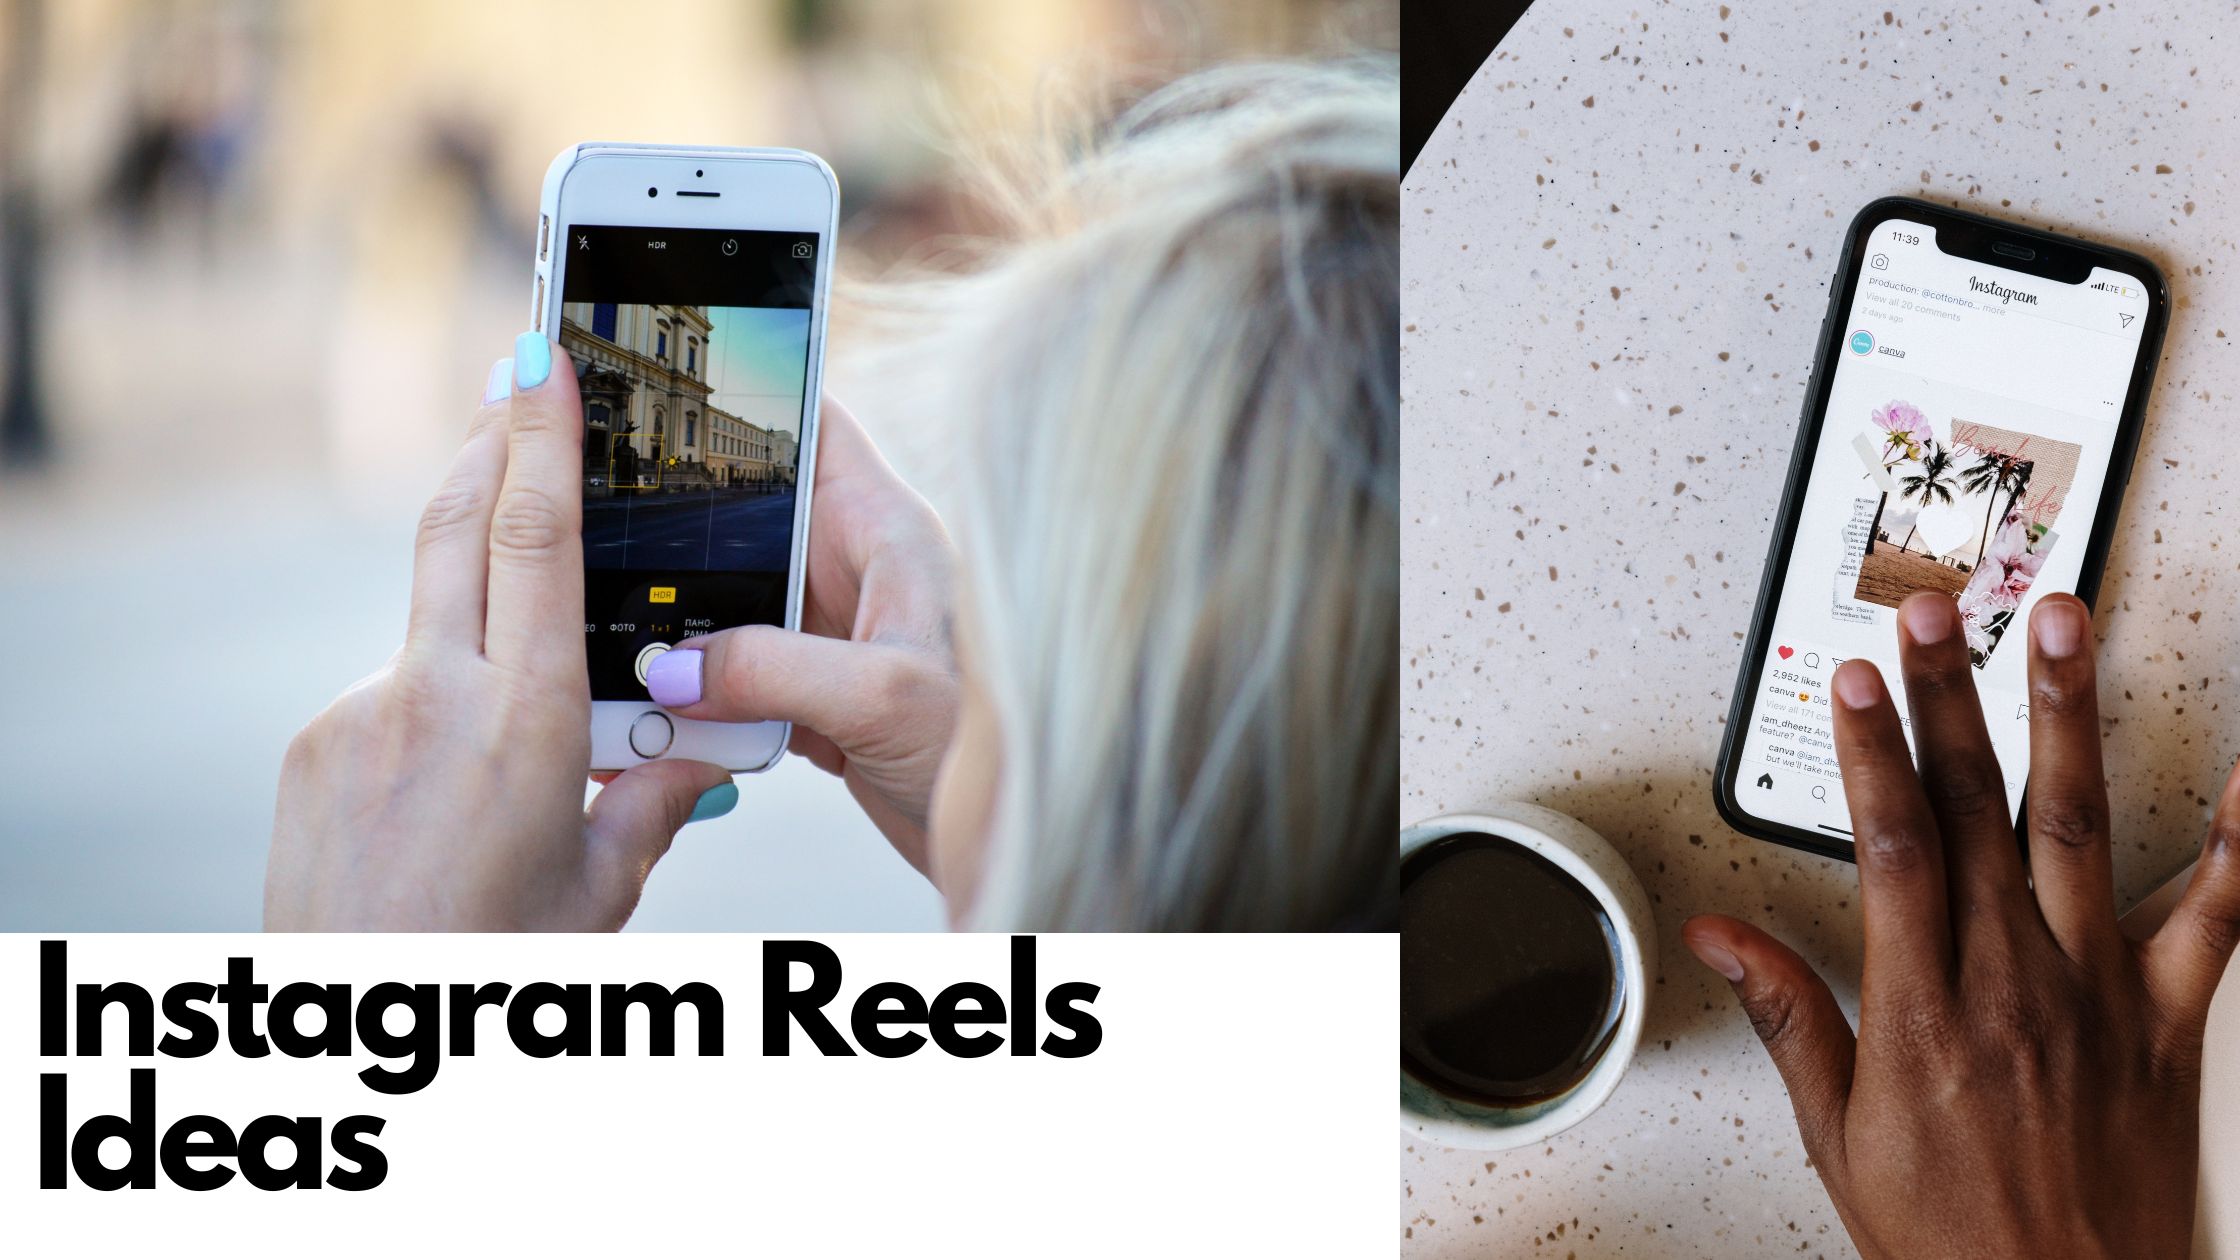 How to use Instagram reels for business